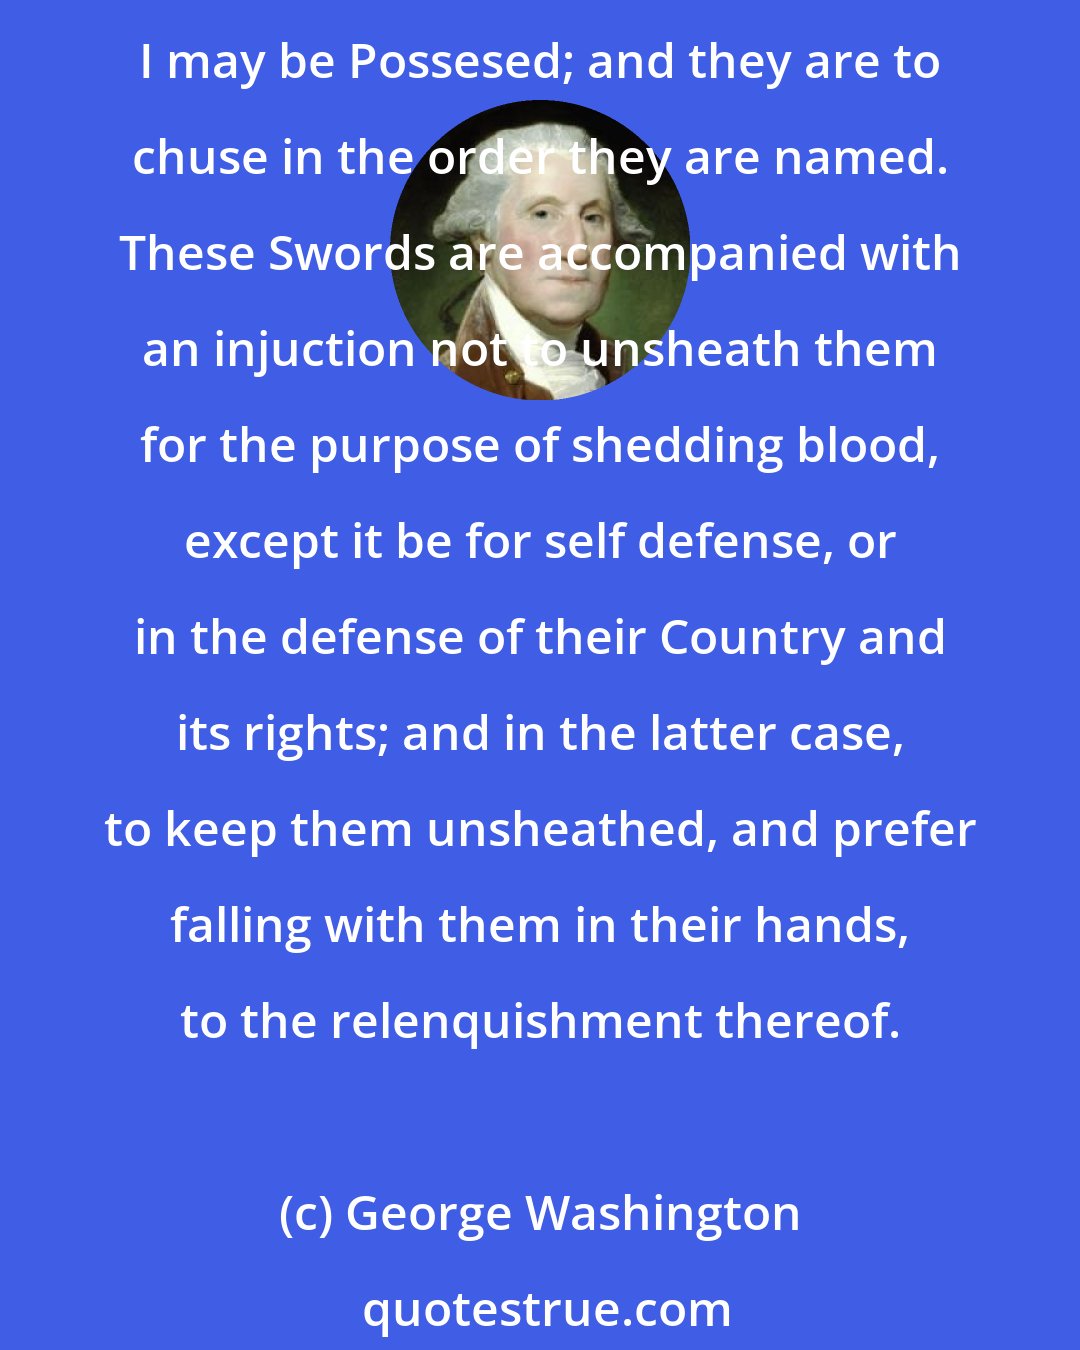 George Washington: To each of my Nephews, William Augustine Washington, George Lewis, George Steptoe Washington, Bushrod Washington, and Samuel Washington, I give one of my swords or Cutteaux of which I may be Possesed; and they are to chuse in the order they are named. These Swords are accompanied with an injuction not to unsheath them for the purpose of shedding blood, except it be for self defense, or in the defense of their Country and its rights; and in the latter case, to keep them unsheathed, and prefer falling with them in their hands, to the relenquishment thereof.